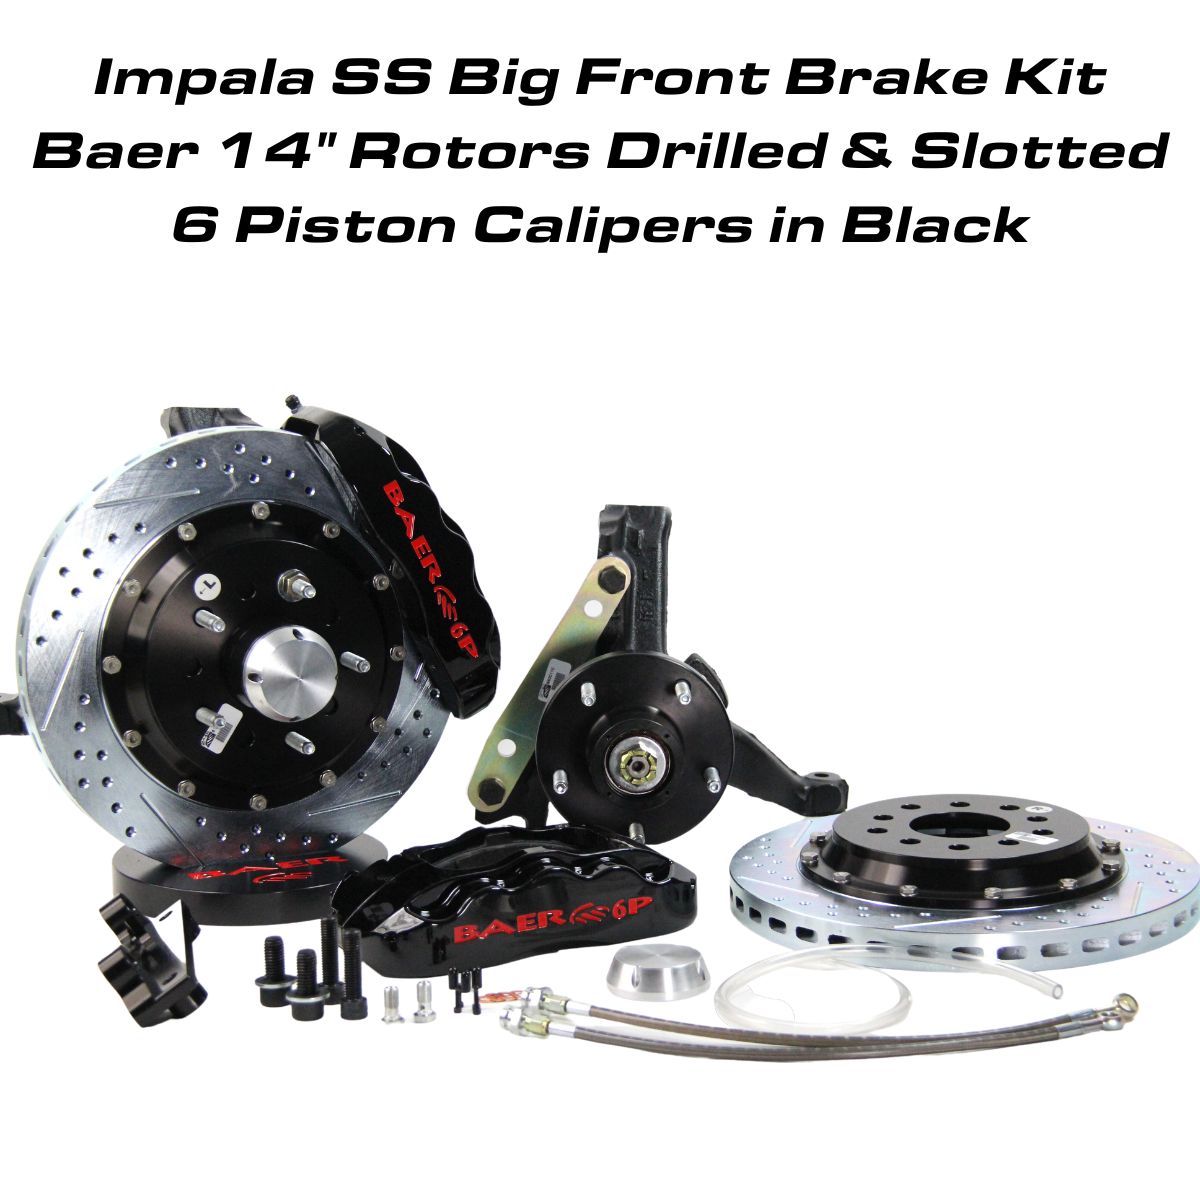 Impala SS Big Front Brake Kit, 14 Inch Baer Rotors, 6 Piston Forged 6P Calipers - Drilled and Slotted, Black Calipers